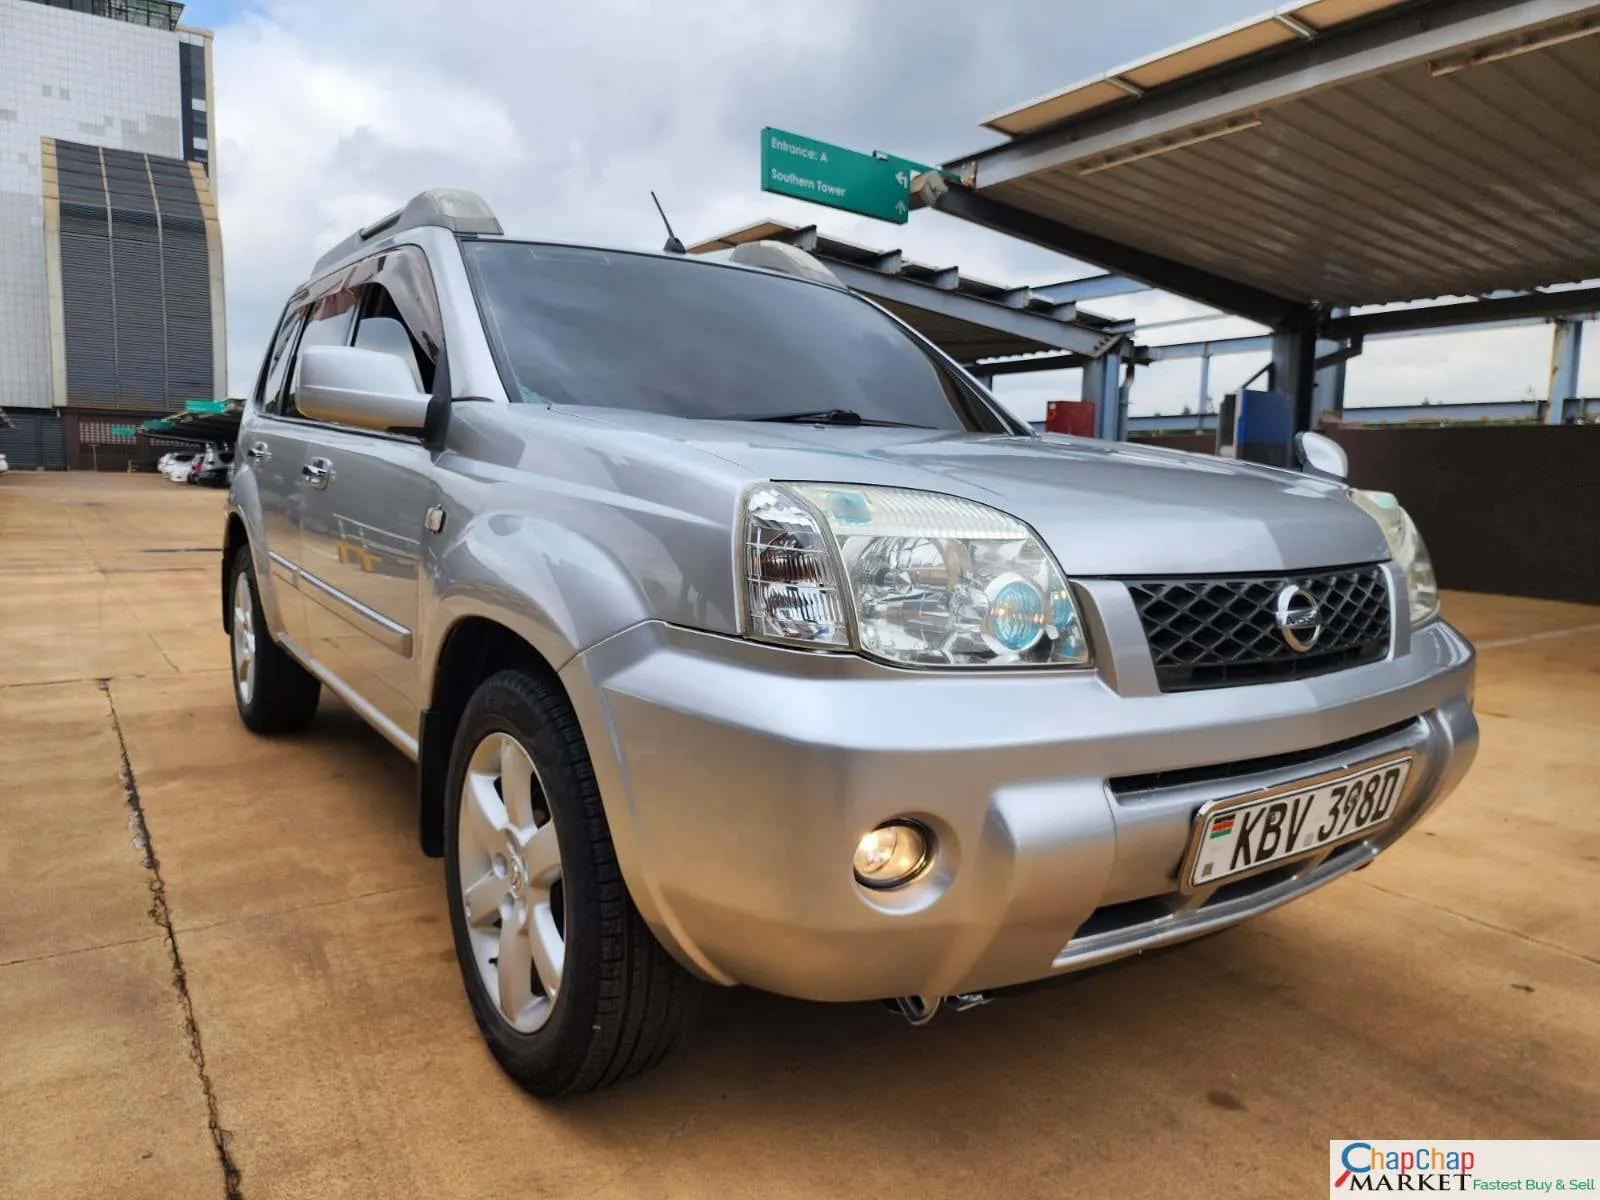 Nissan XTRAIL You Pay 30% Deposit Trade in Ok xtrail for sale in kenya hire purchase installments installments